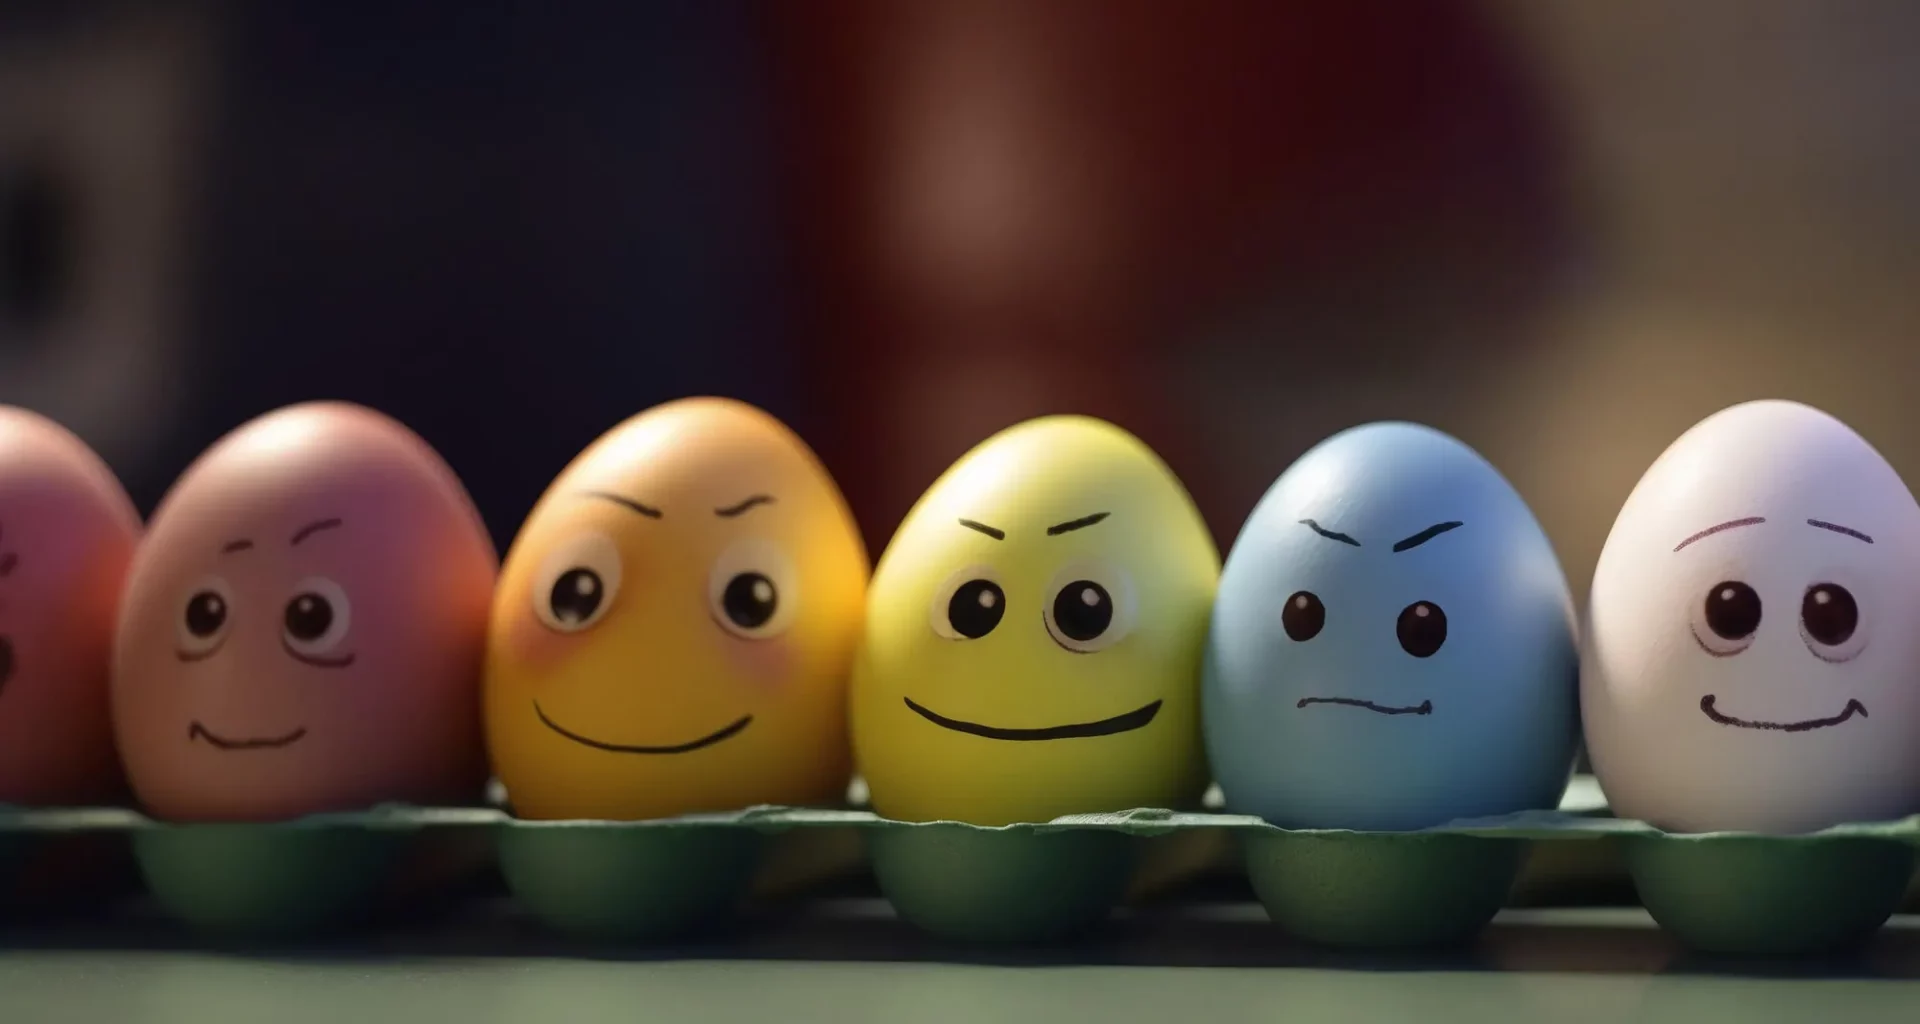 eggs painted with different emotional faces